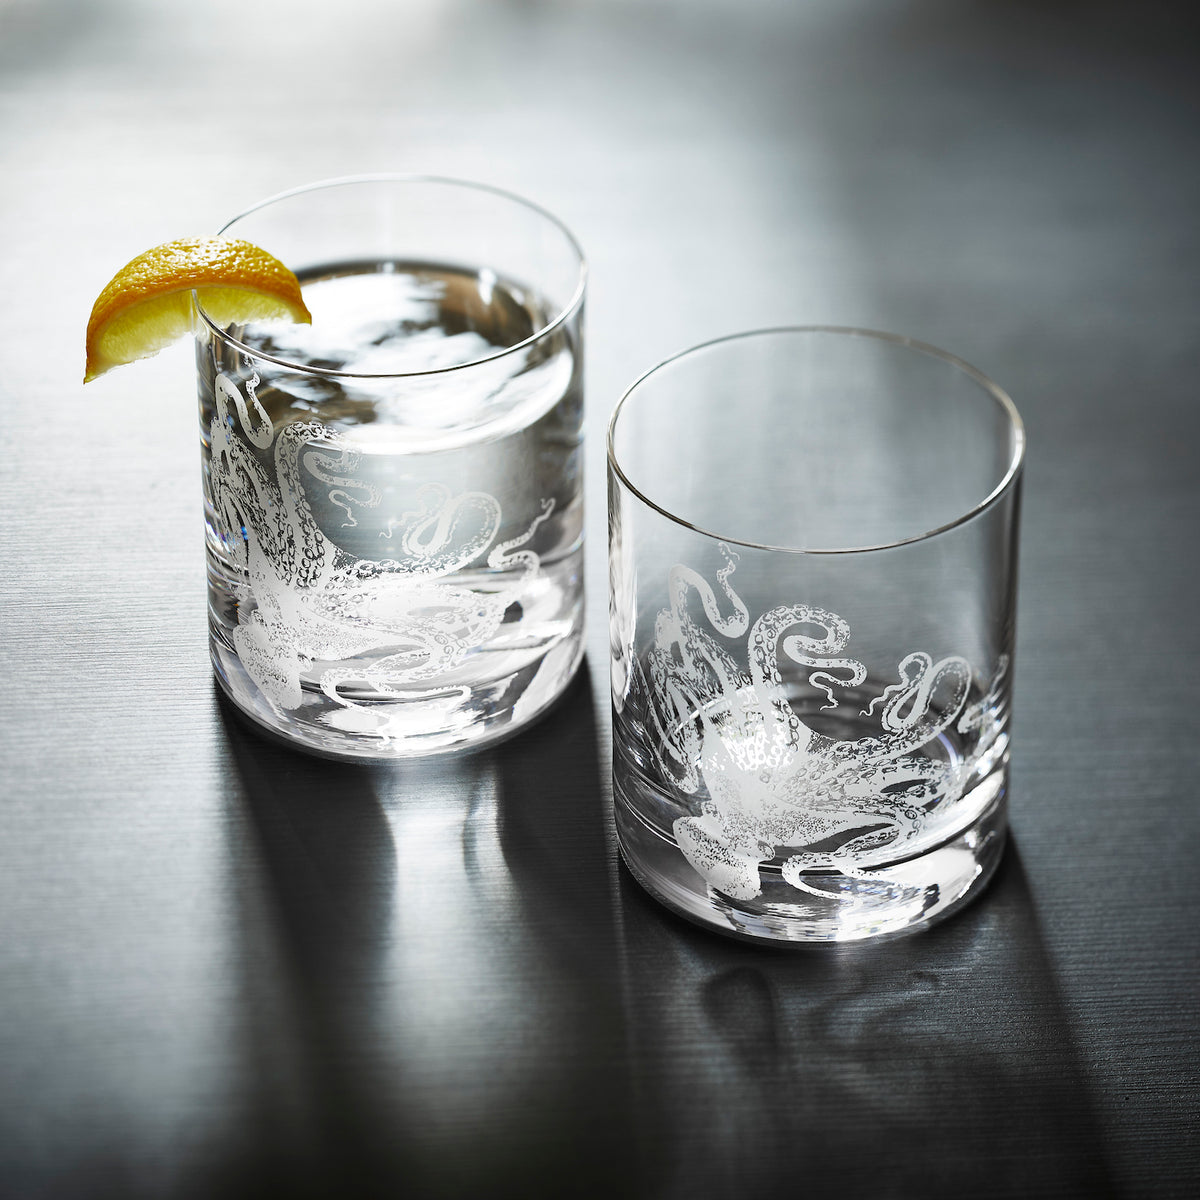 Lucy Tumbler Glassware Set of 2 hand-etched crystal drinkware glasses from Caskata. One shown with water and garnished with lemon and the other is shown empty.